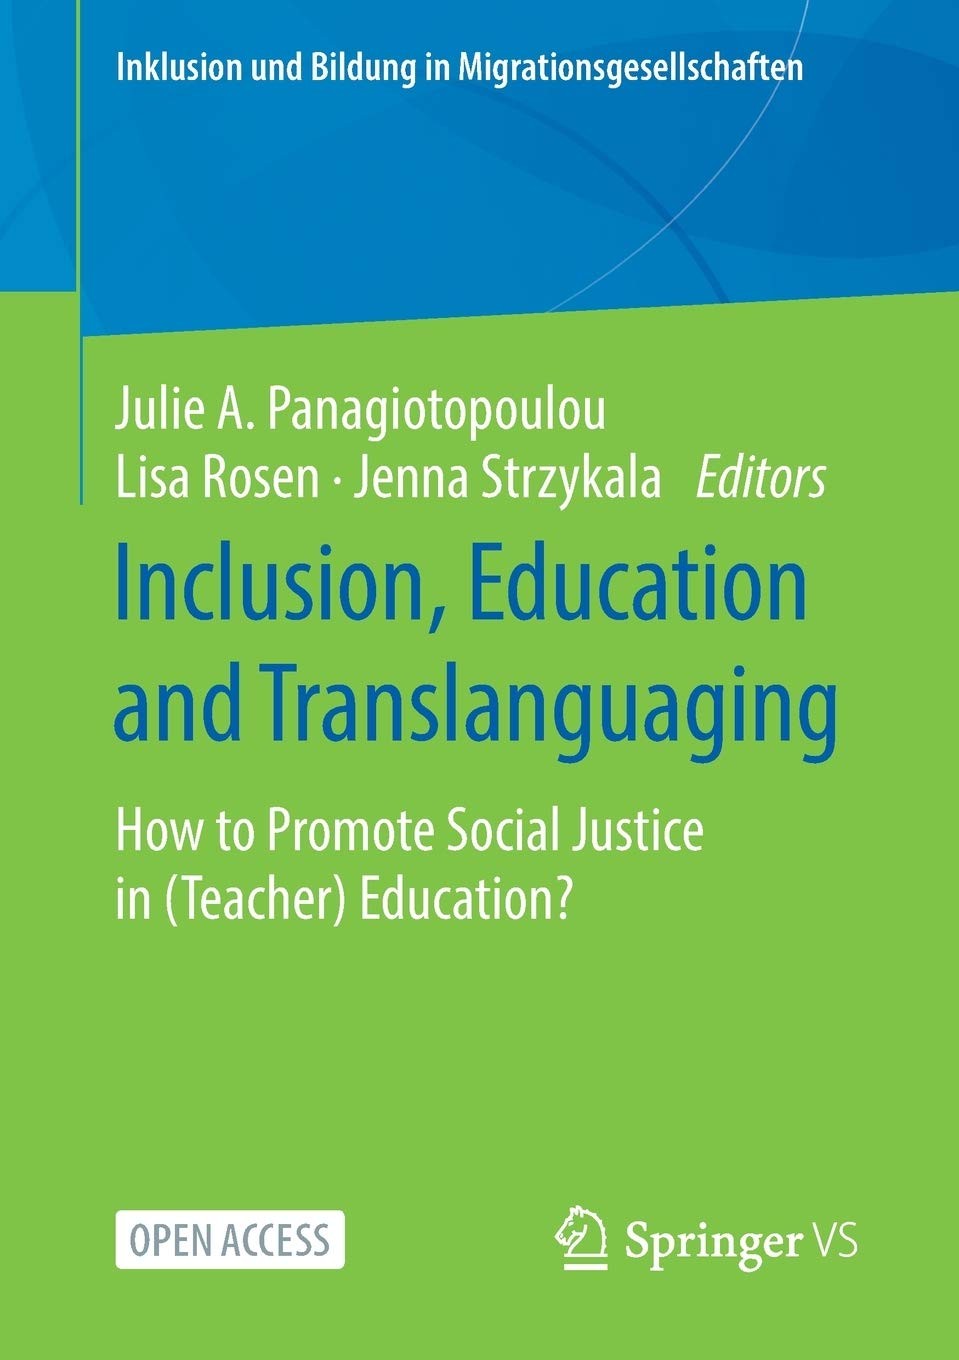 Inclusion, Education and Translanguaging: How to Promote Social Justice in (Teacher) Education?